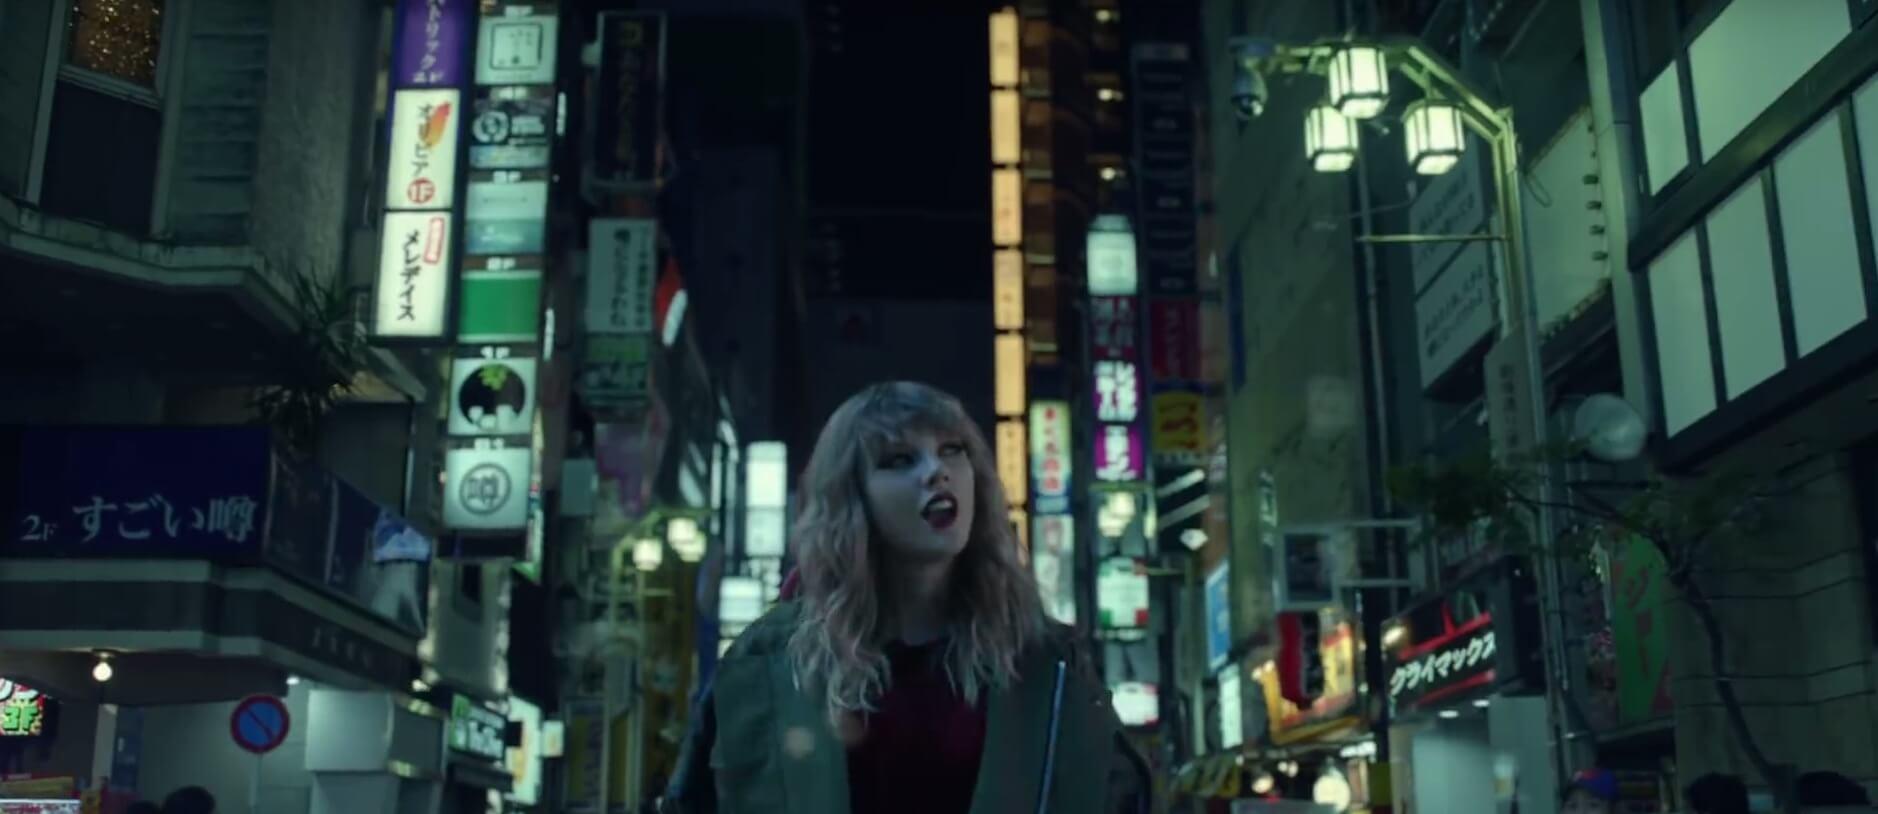 Taylor Swift S New Music Video End Game Shot In Streets Of Tokyo